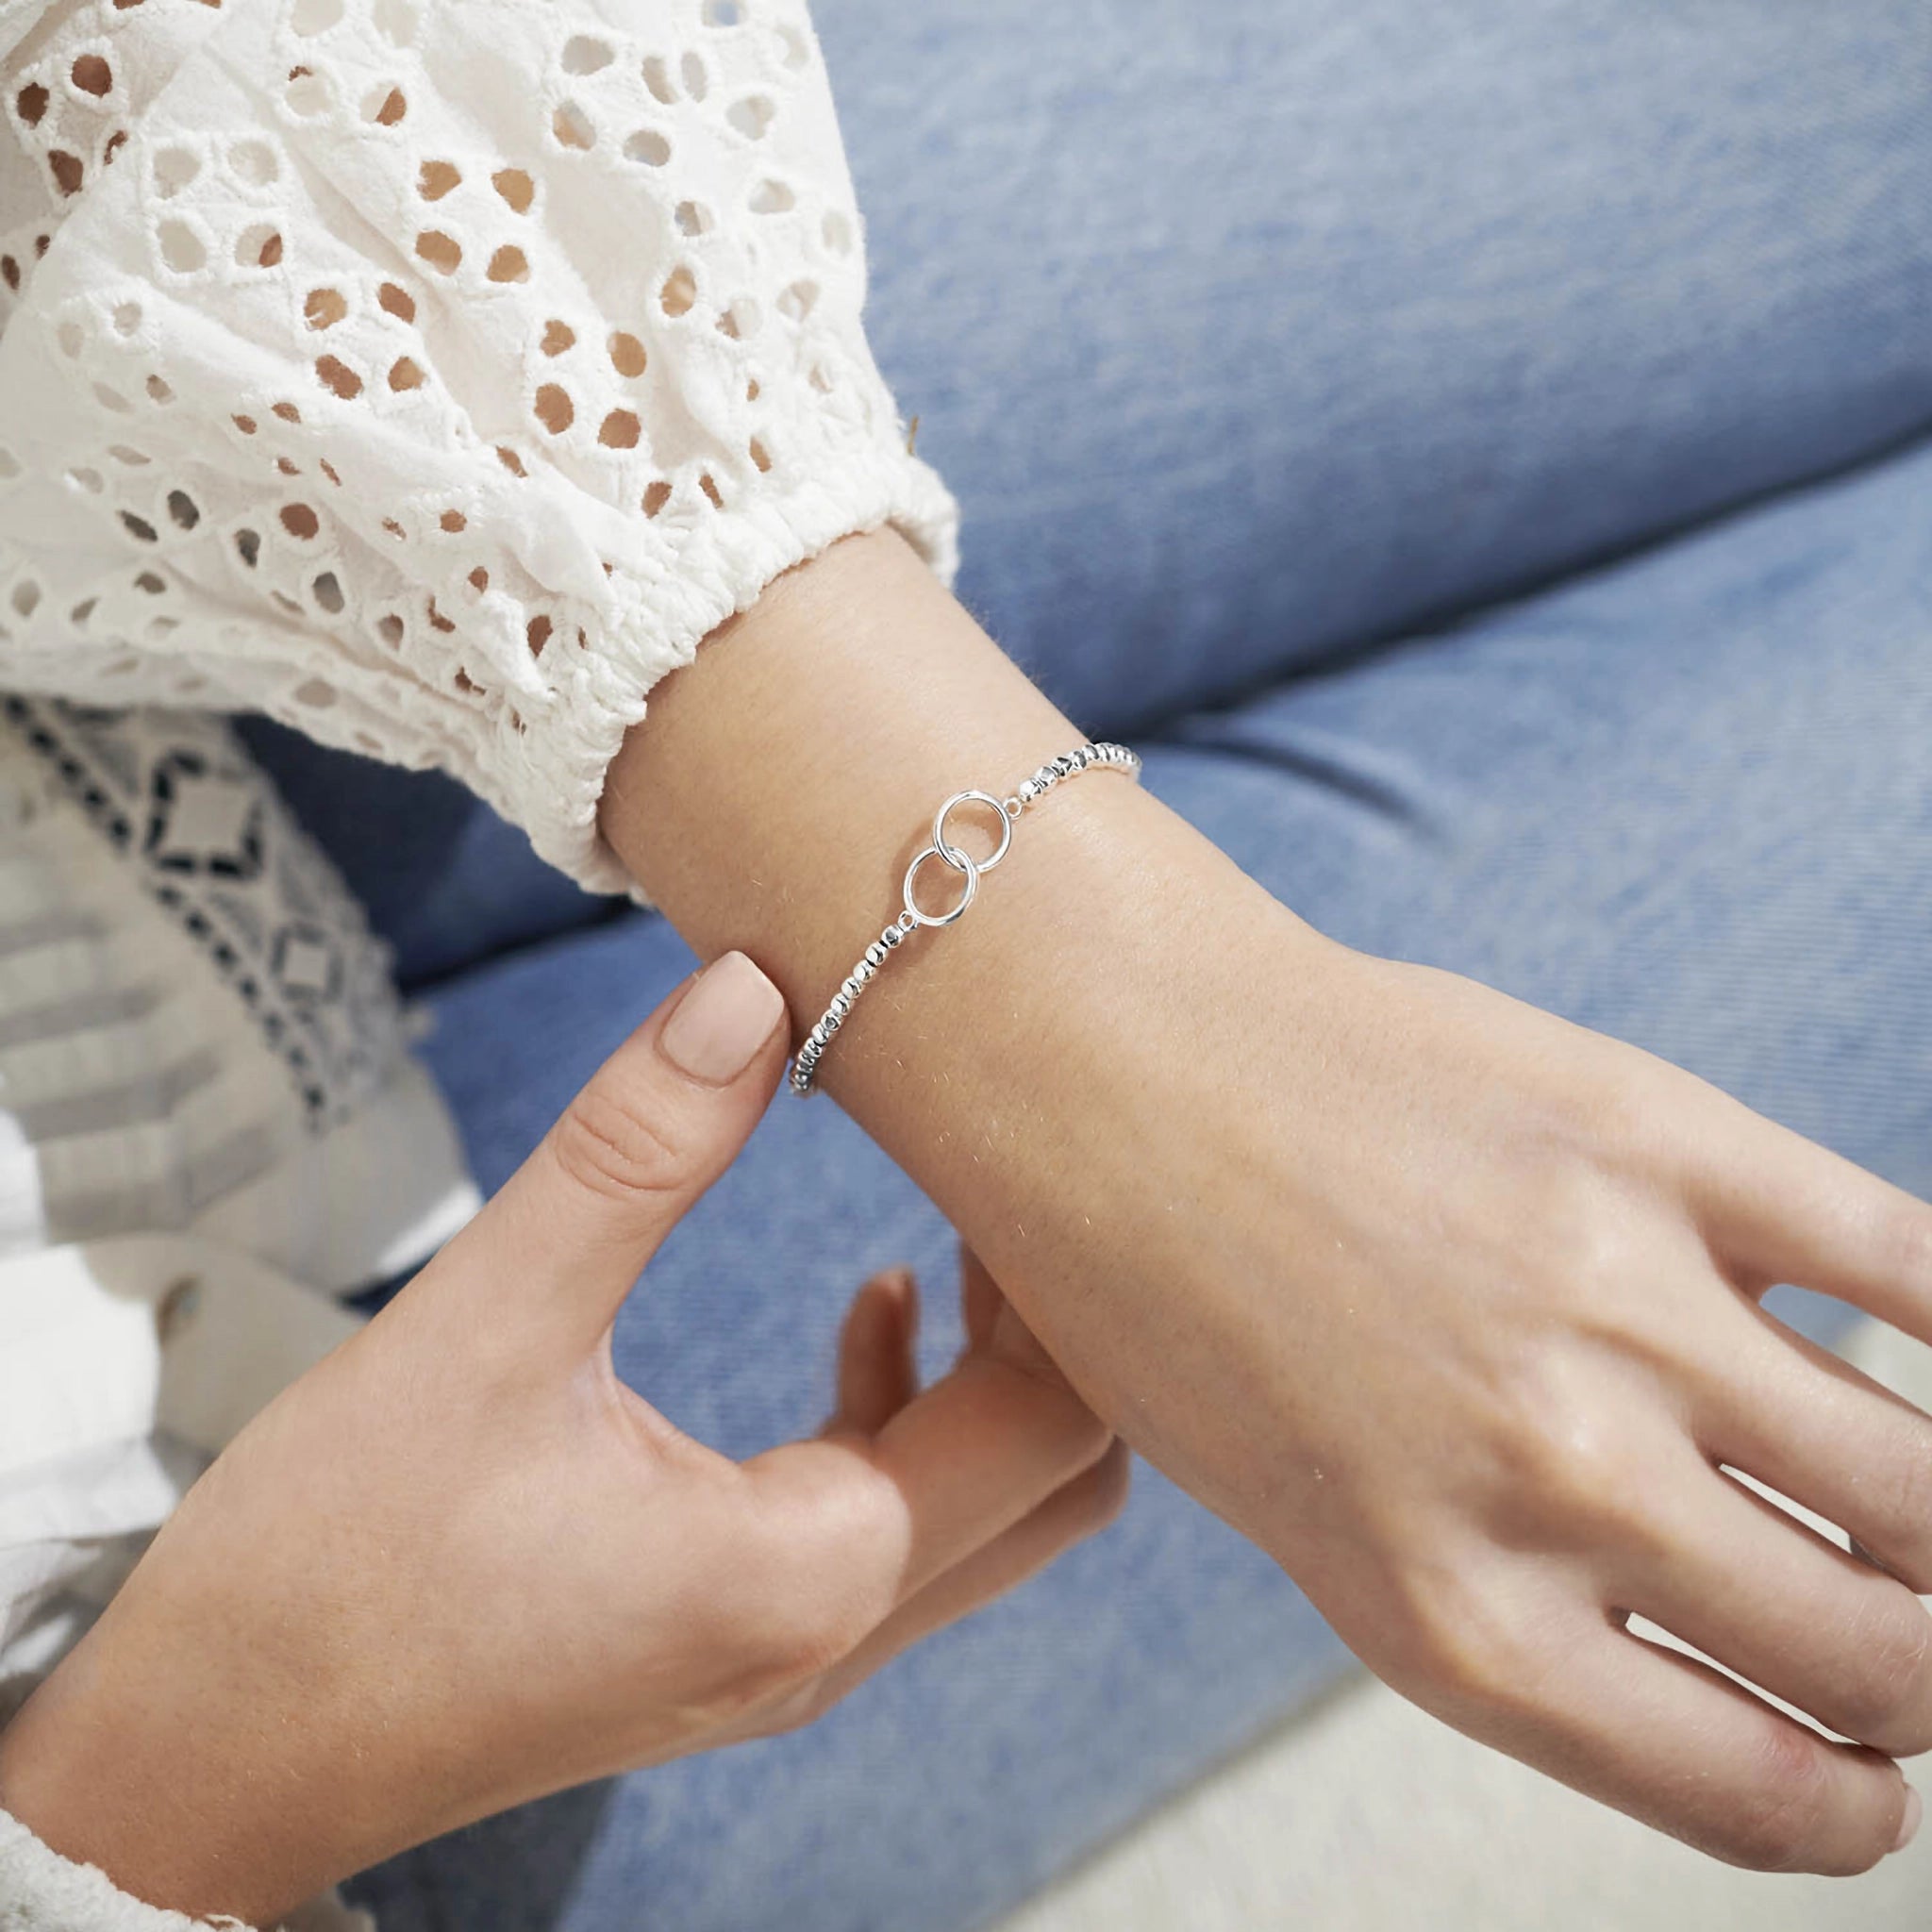 Model wearing a silver beaded bracelet with silver interlinking circles